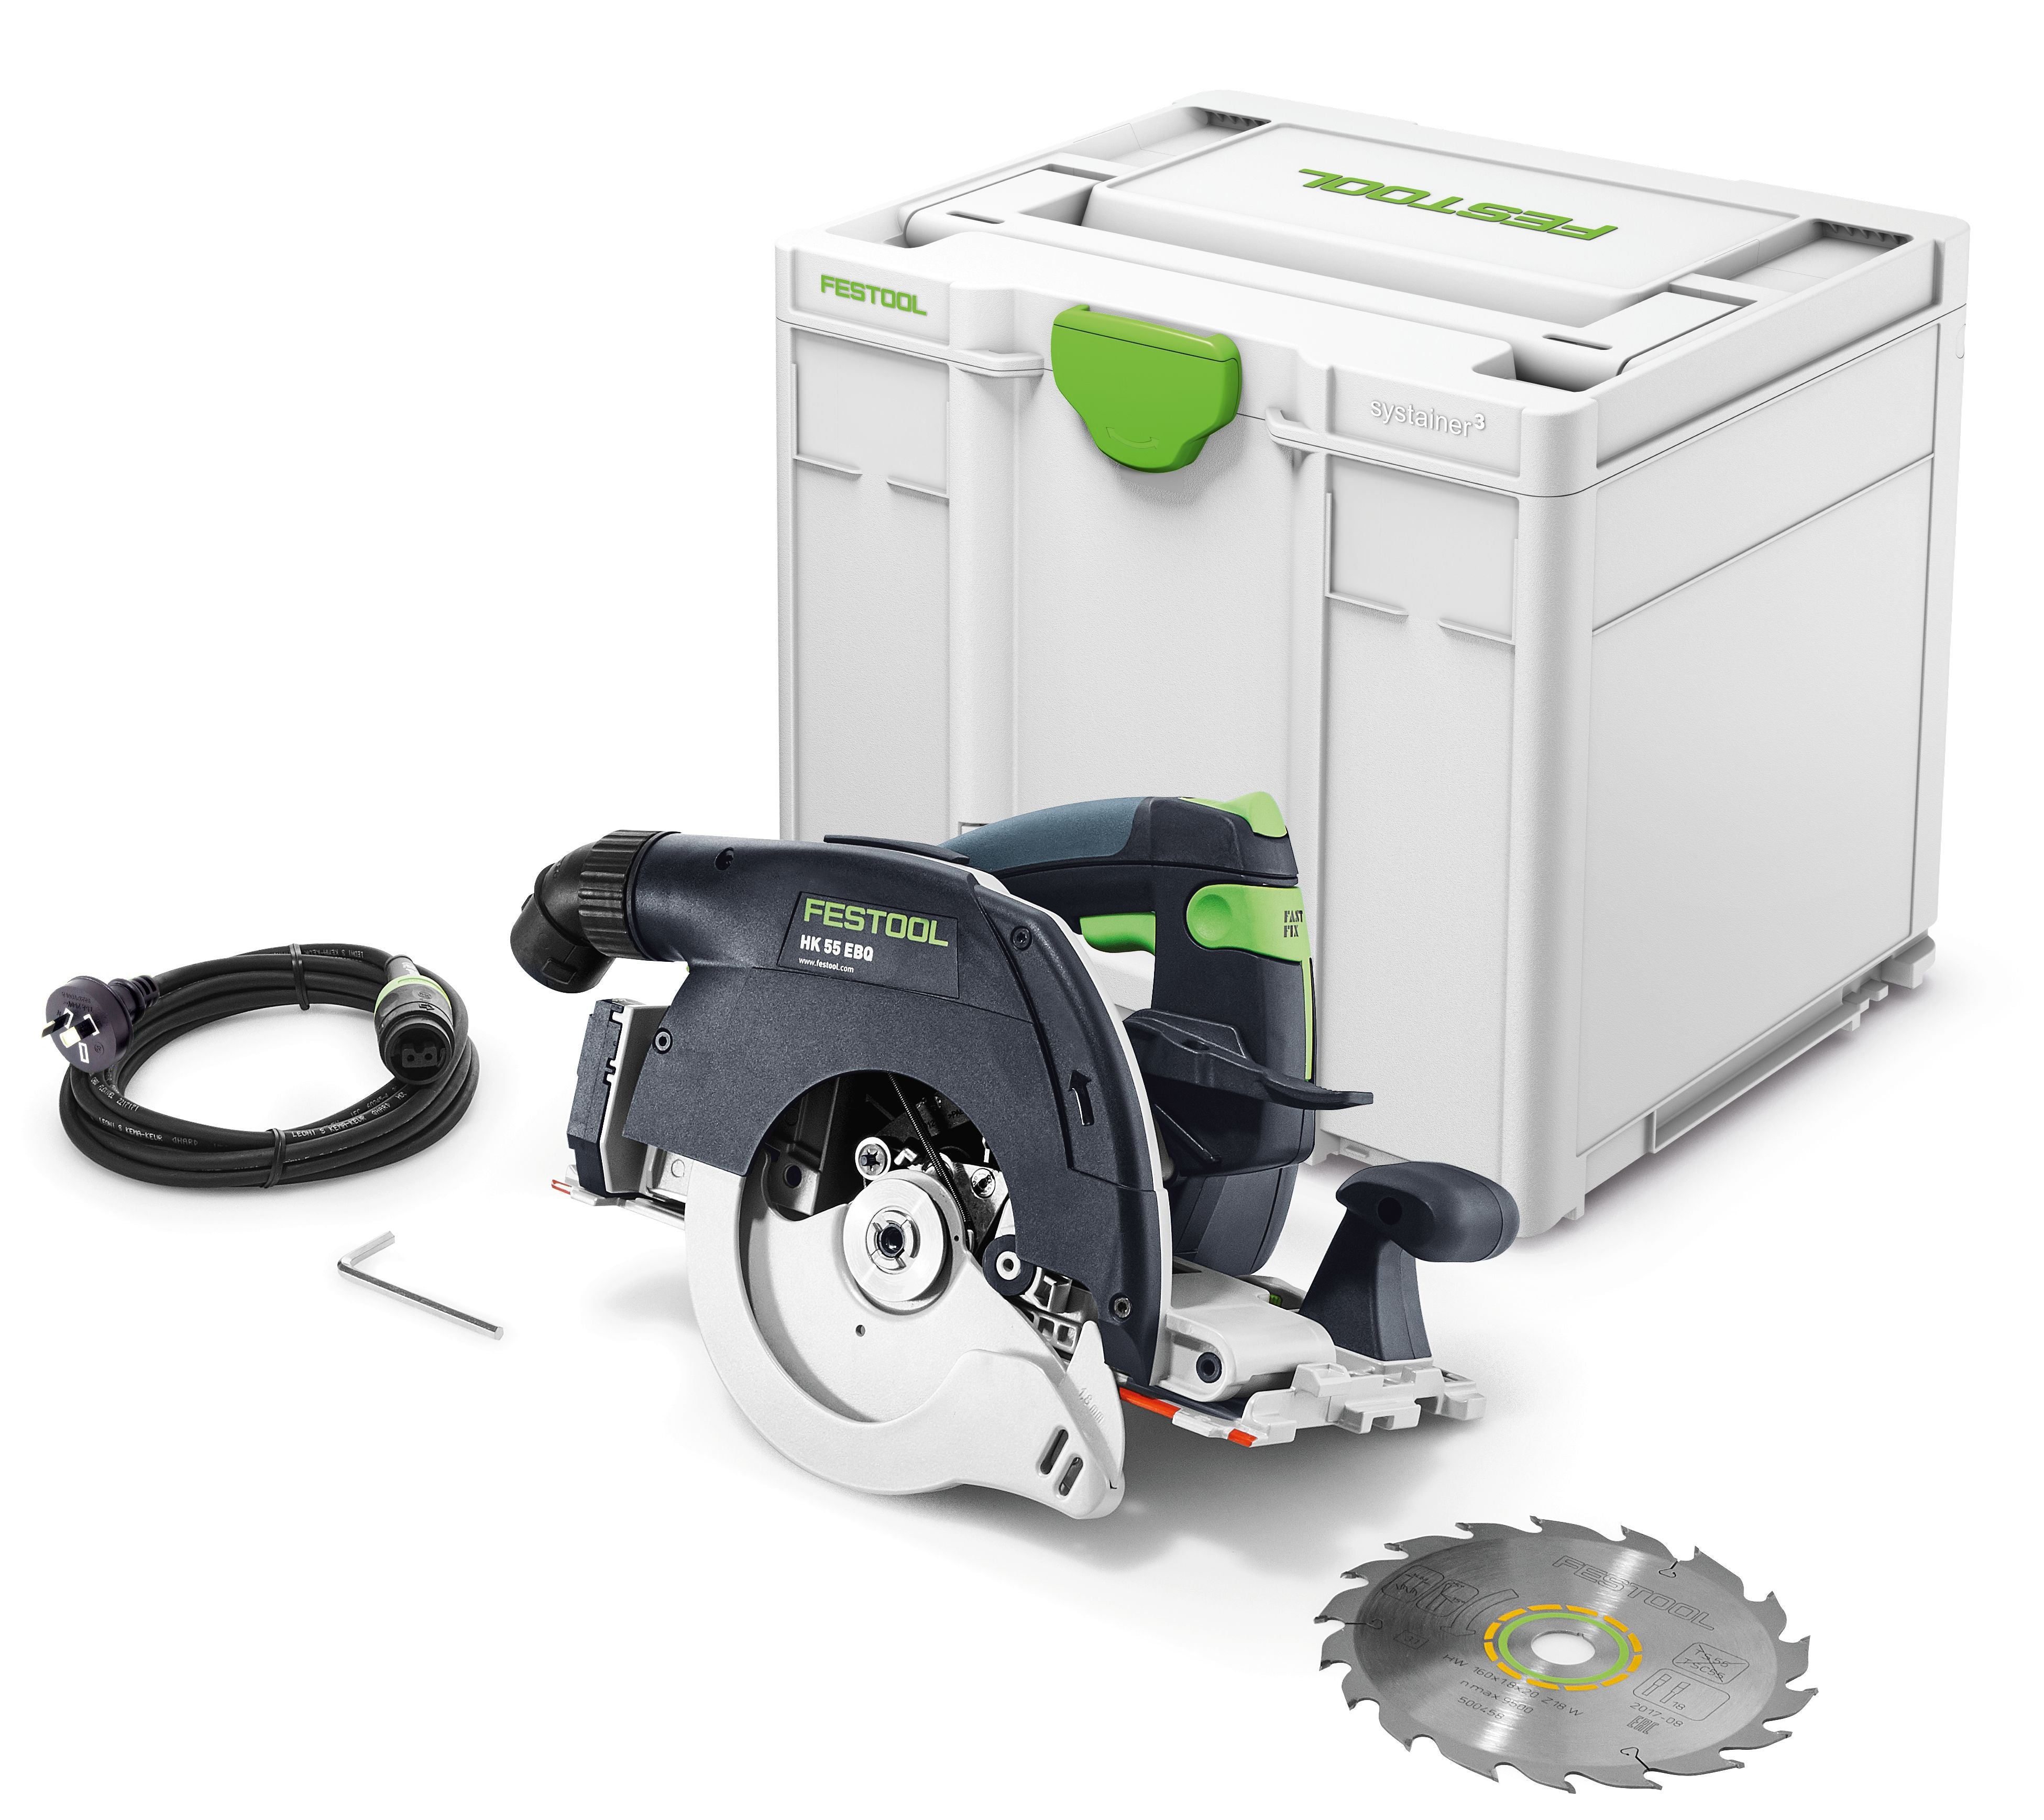 HK 55 160m Circular Saw in Systainer 576122 by Festool